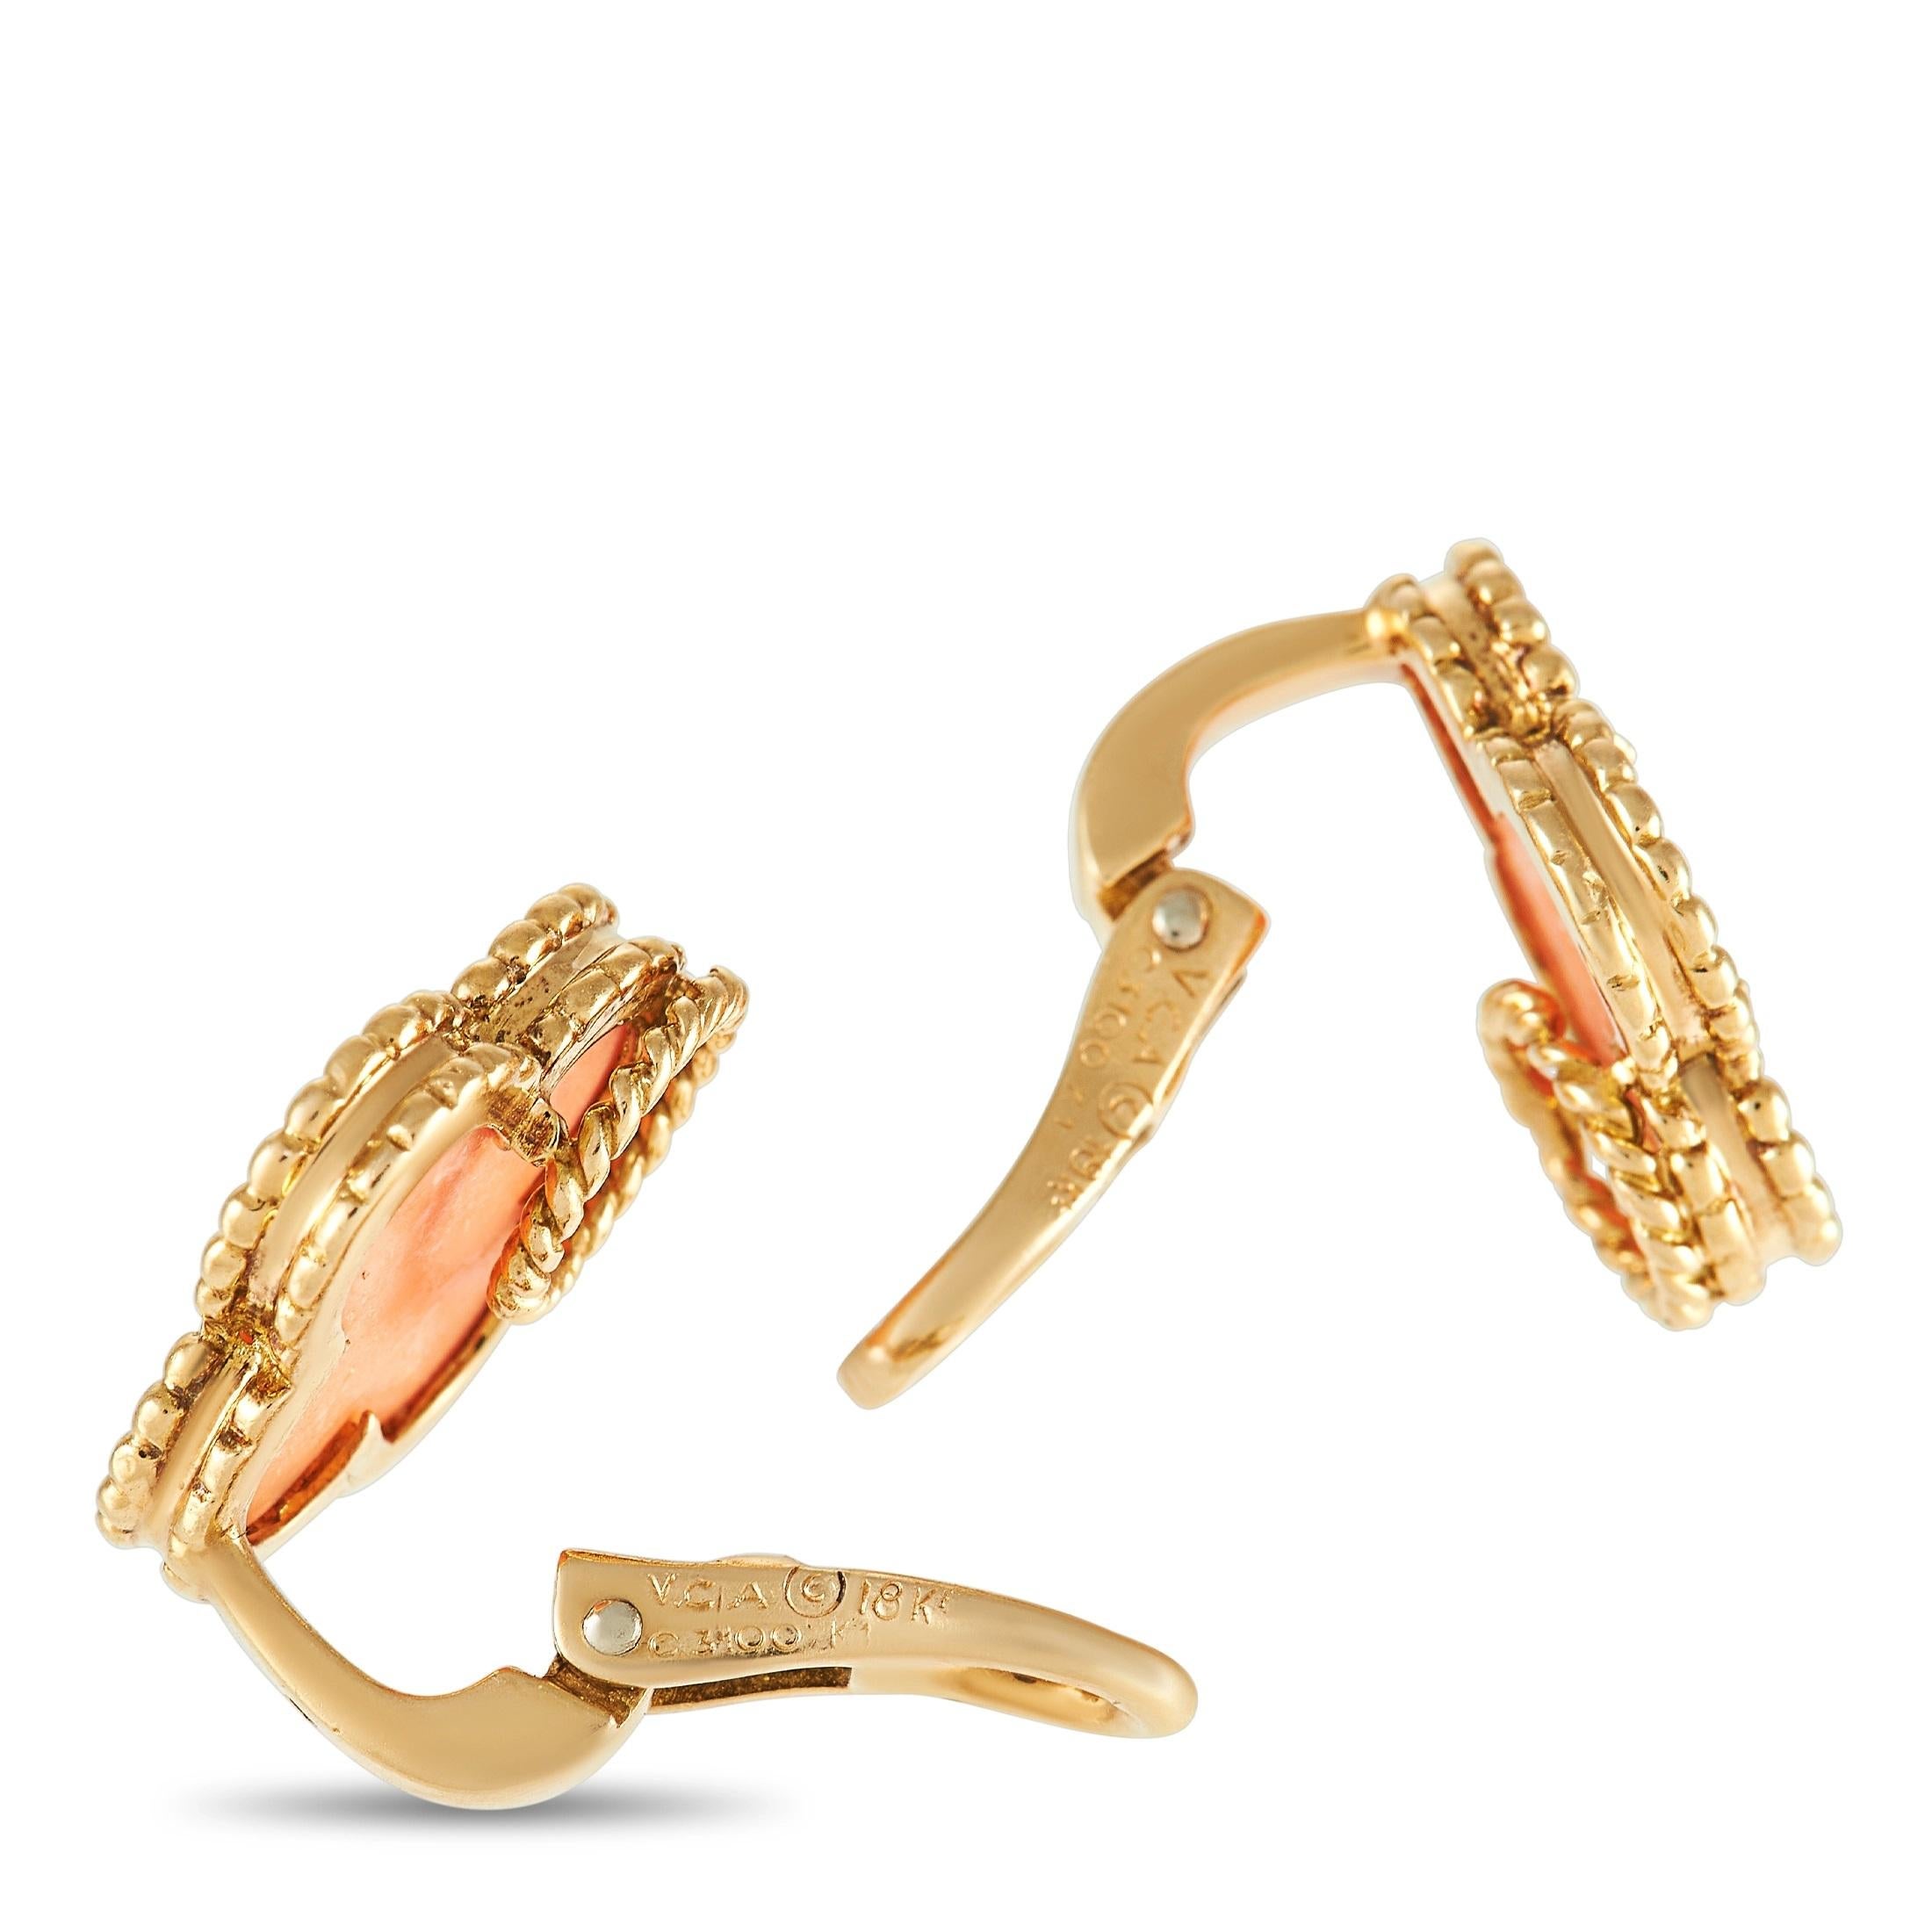 Made from lustrous 18K Yellow Gold, these Van Cleef & Arpels earrings will add luxury to any ensemble. The brand’s iconic Alhambra shape is only elevated by opulent Coral accenting the center of the design. Each earring measures 0.5” round and